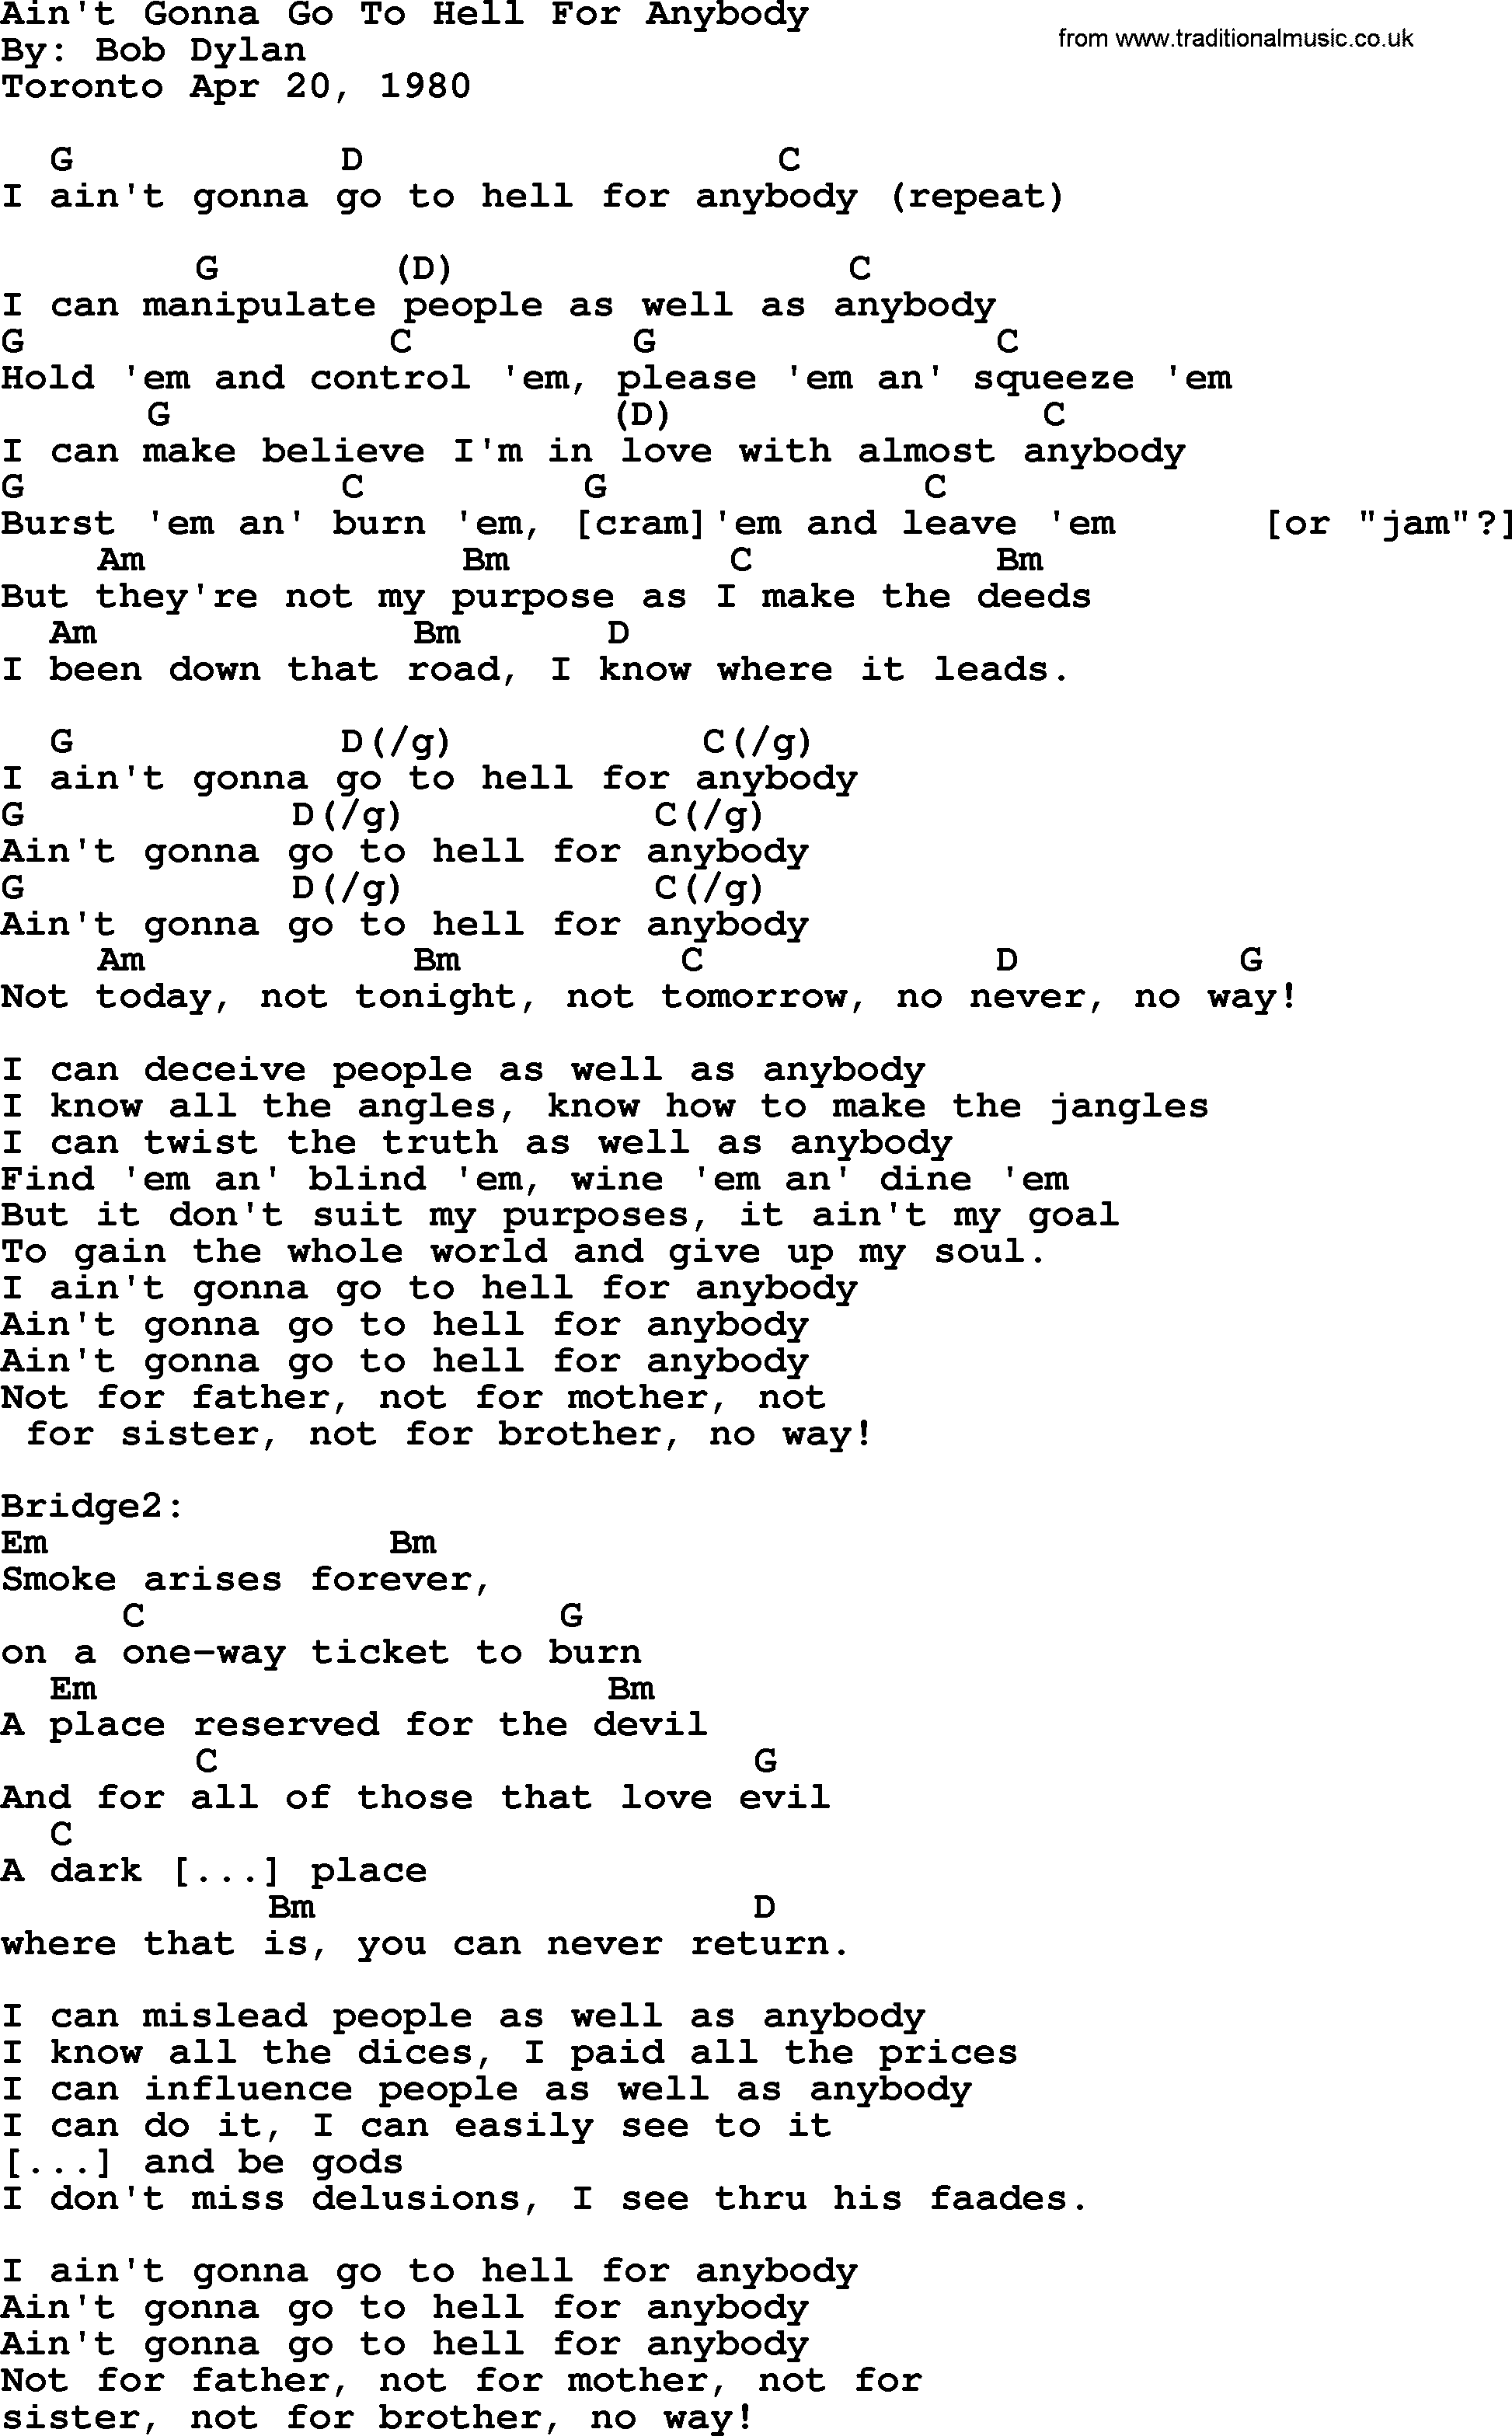 Bob Dylan song, lyrics with chords - Ain't Gonna Go To Hell For Anybody